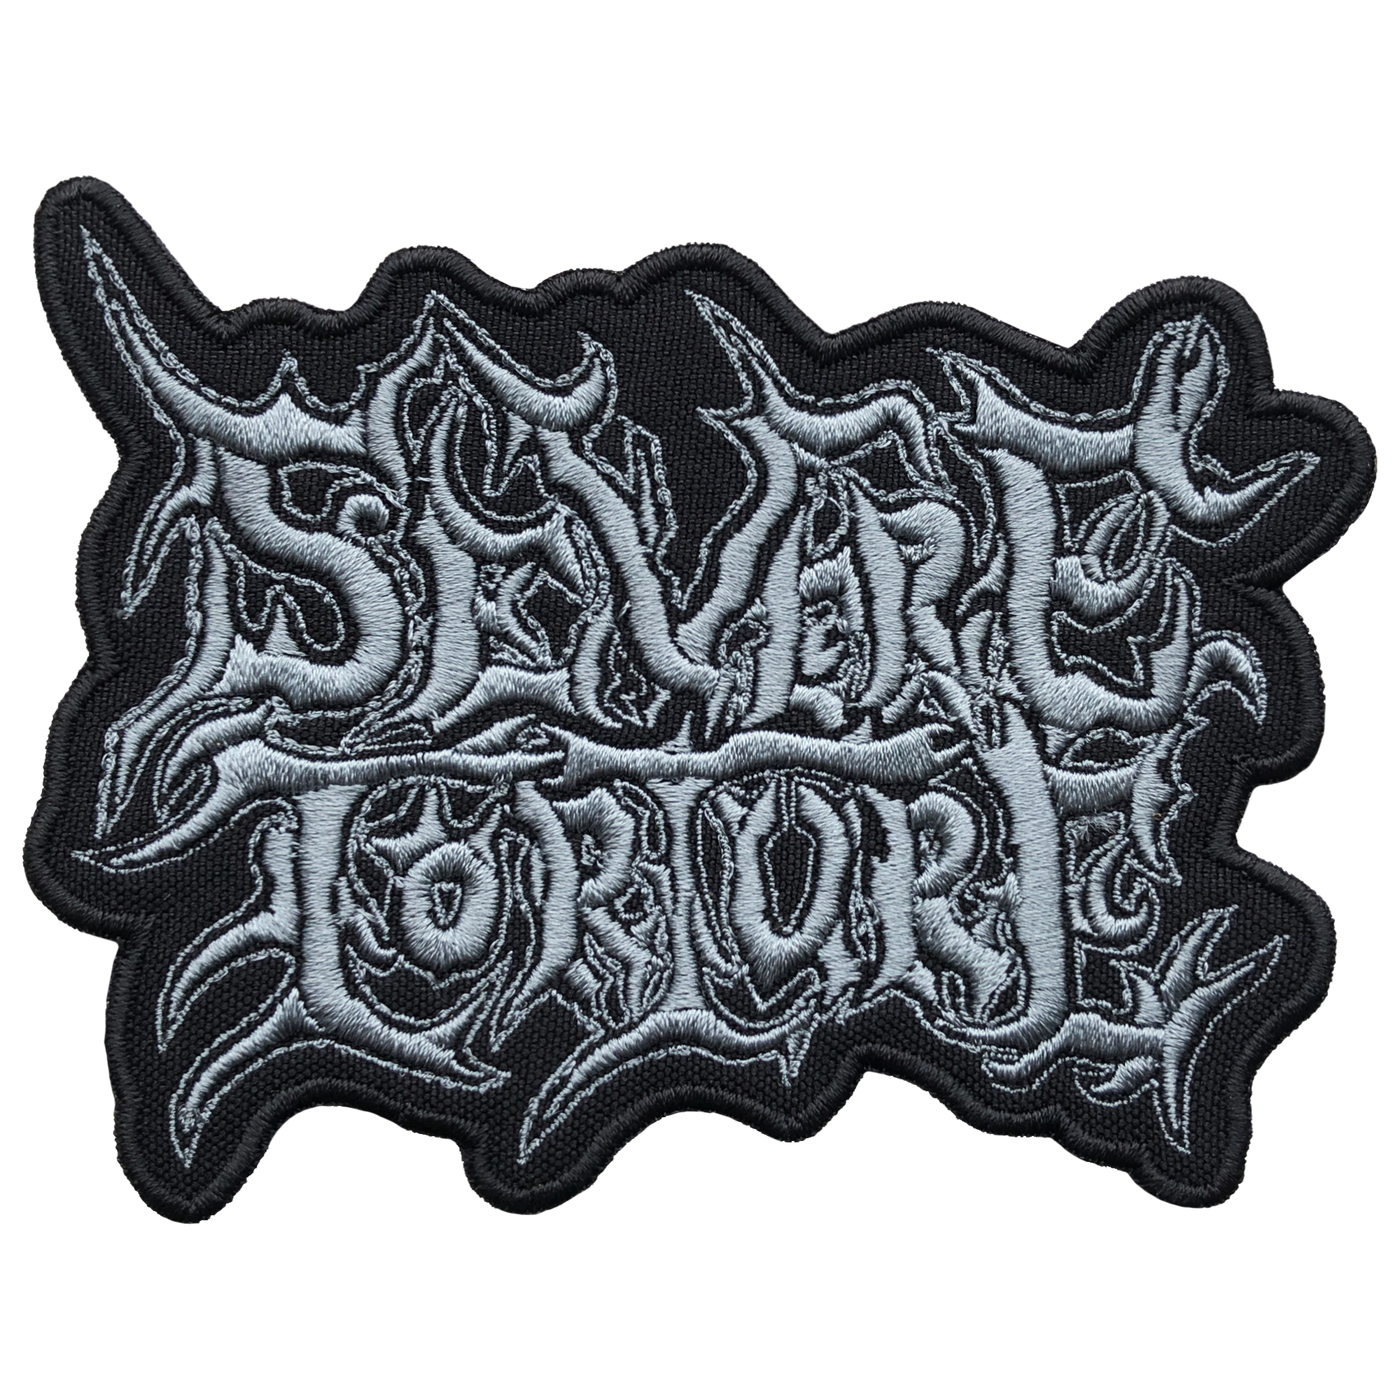 Severe Torture Patches